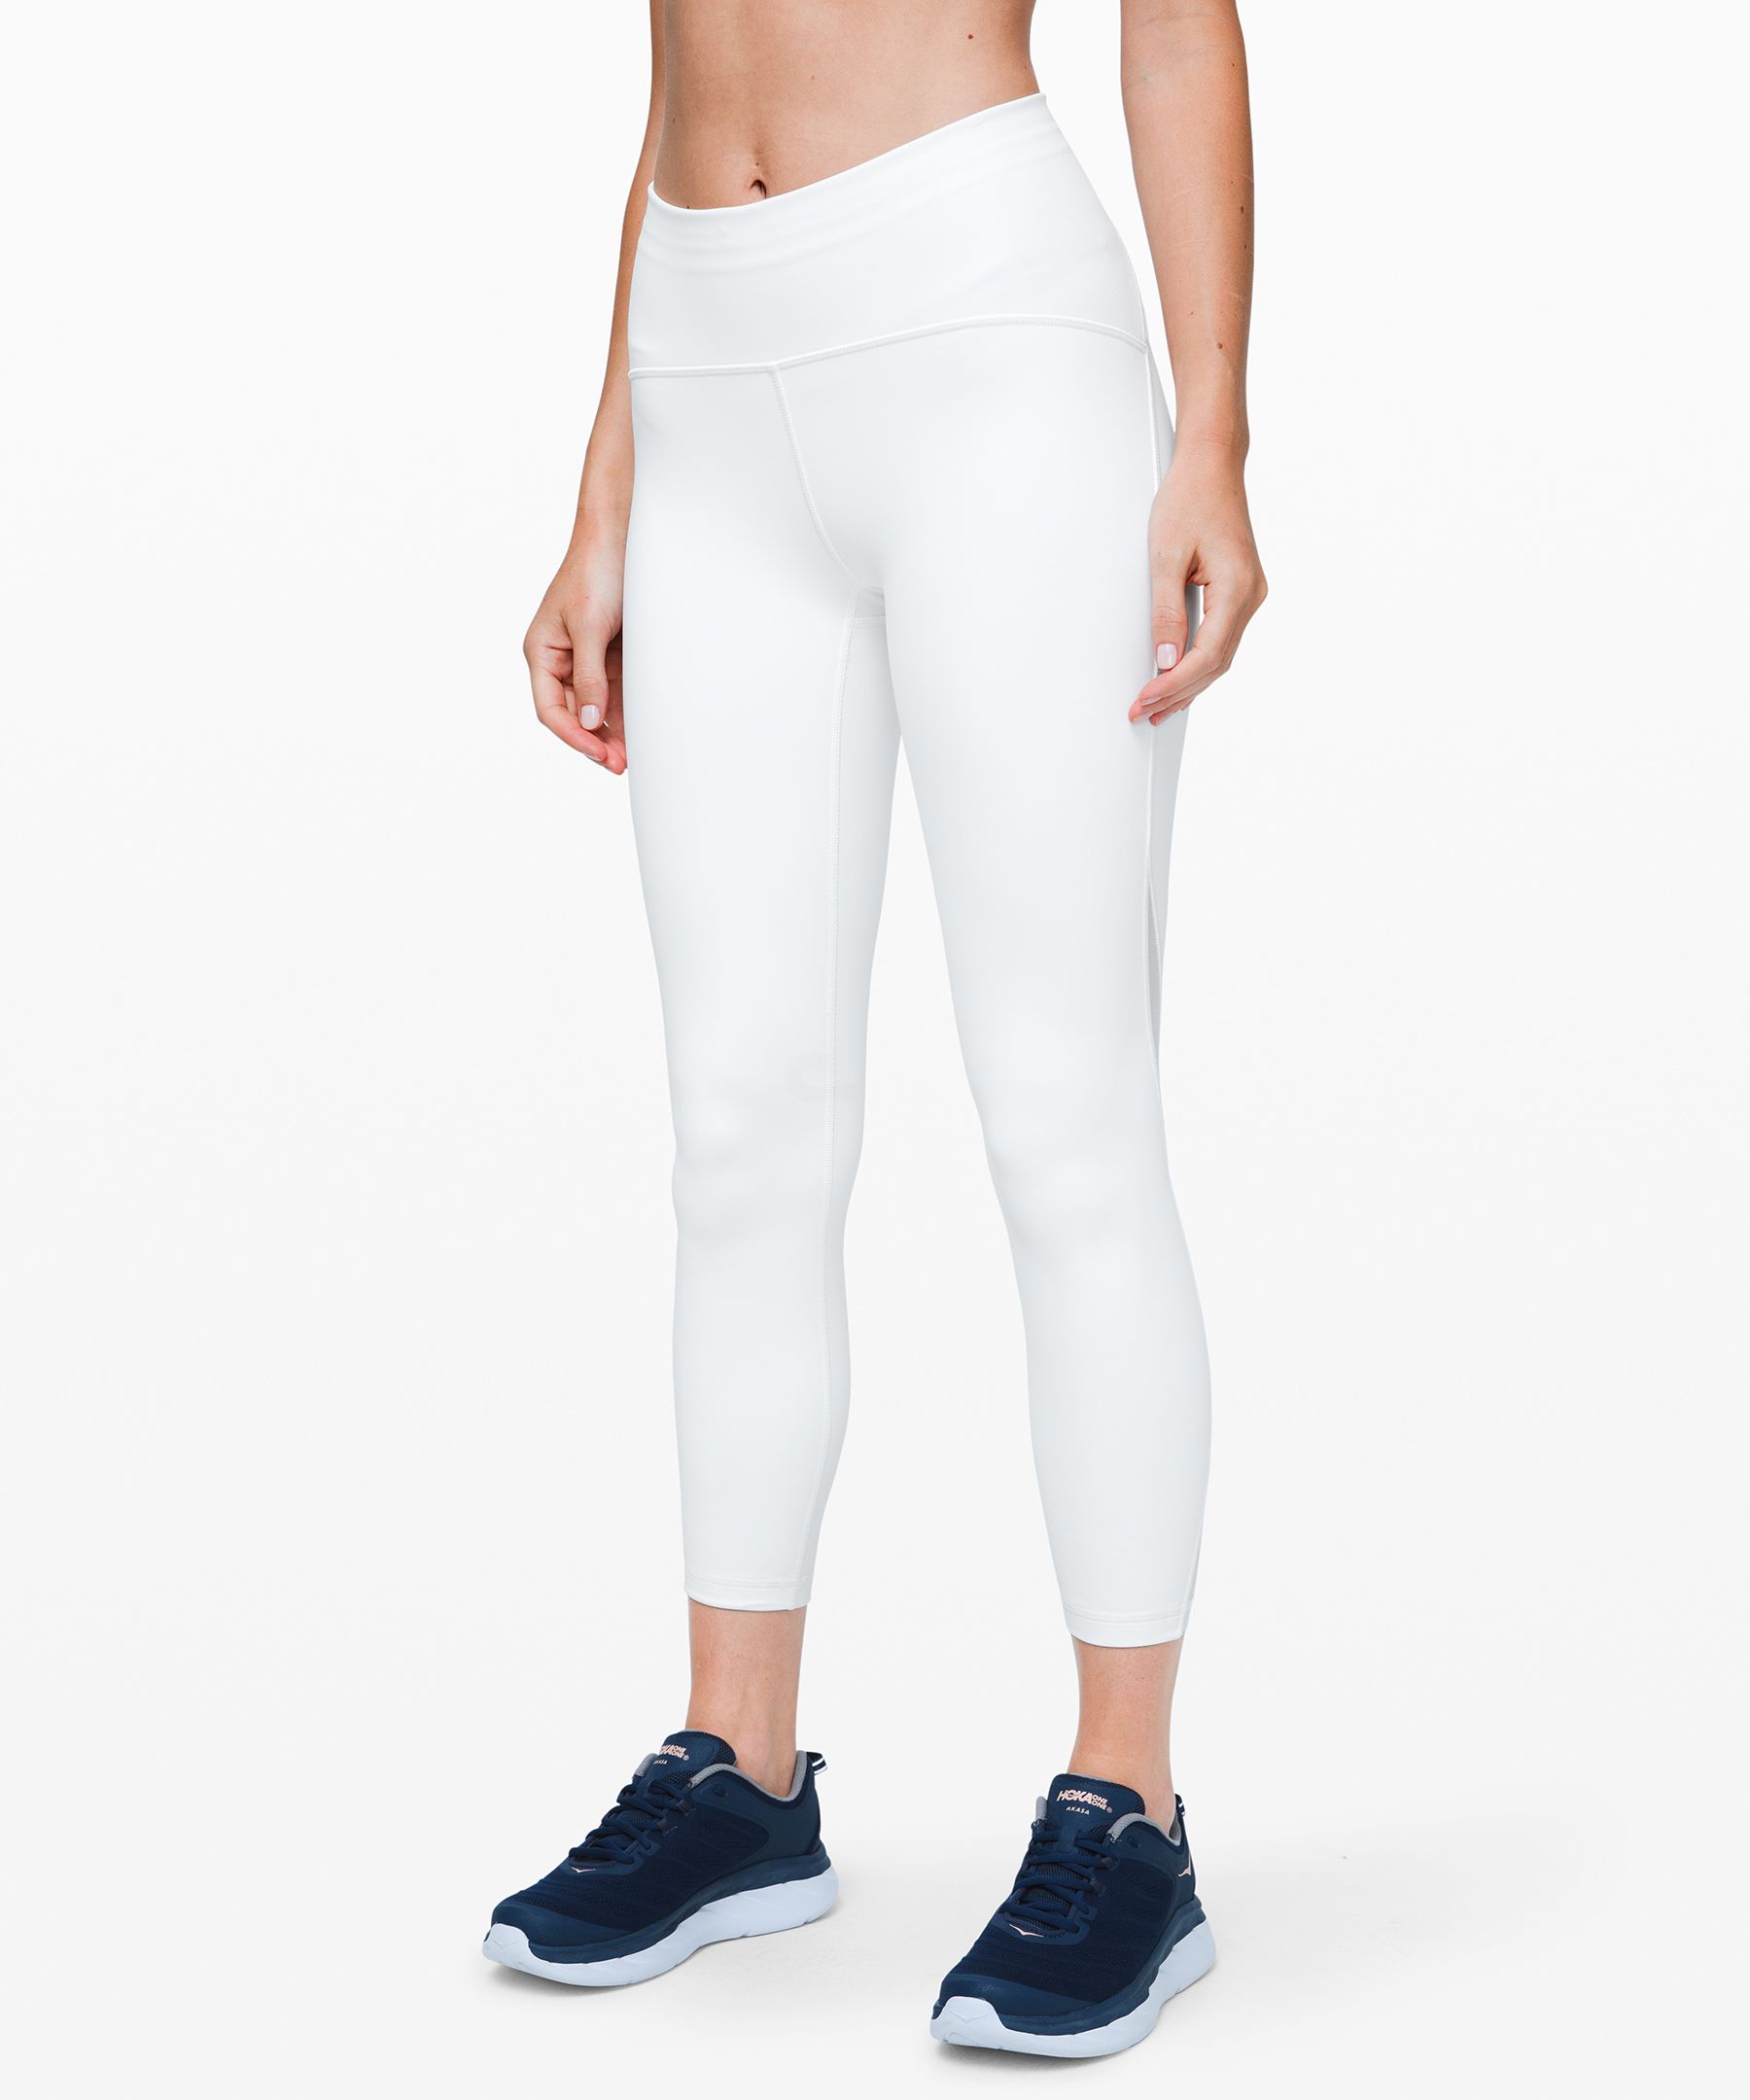 Tightest stuff HR size question. I am size 2 in align, size 4 in wunder  train, size 2-4 in wunder under, size 2 in fast and free (although they are  really tight